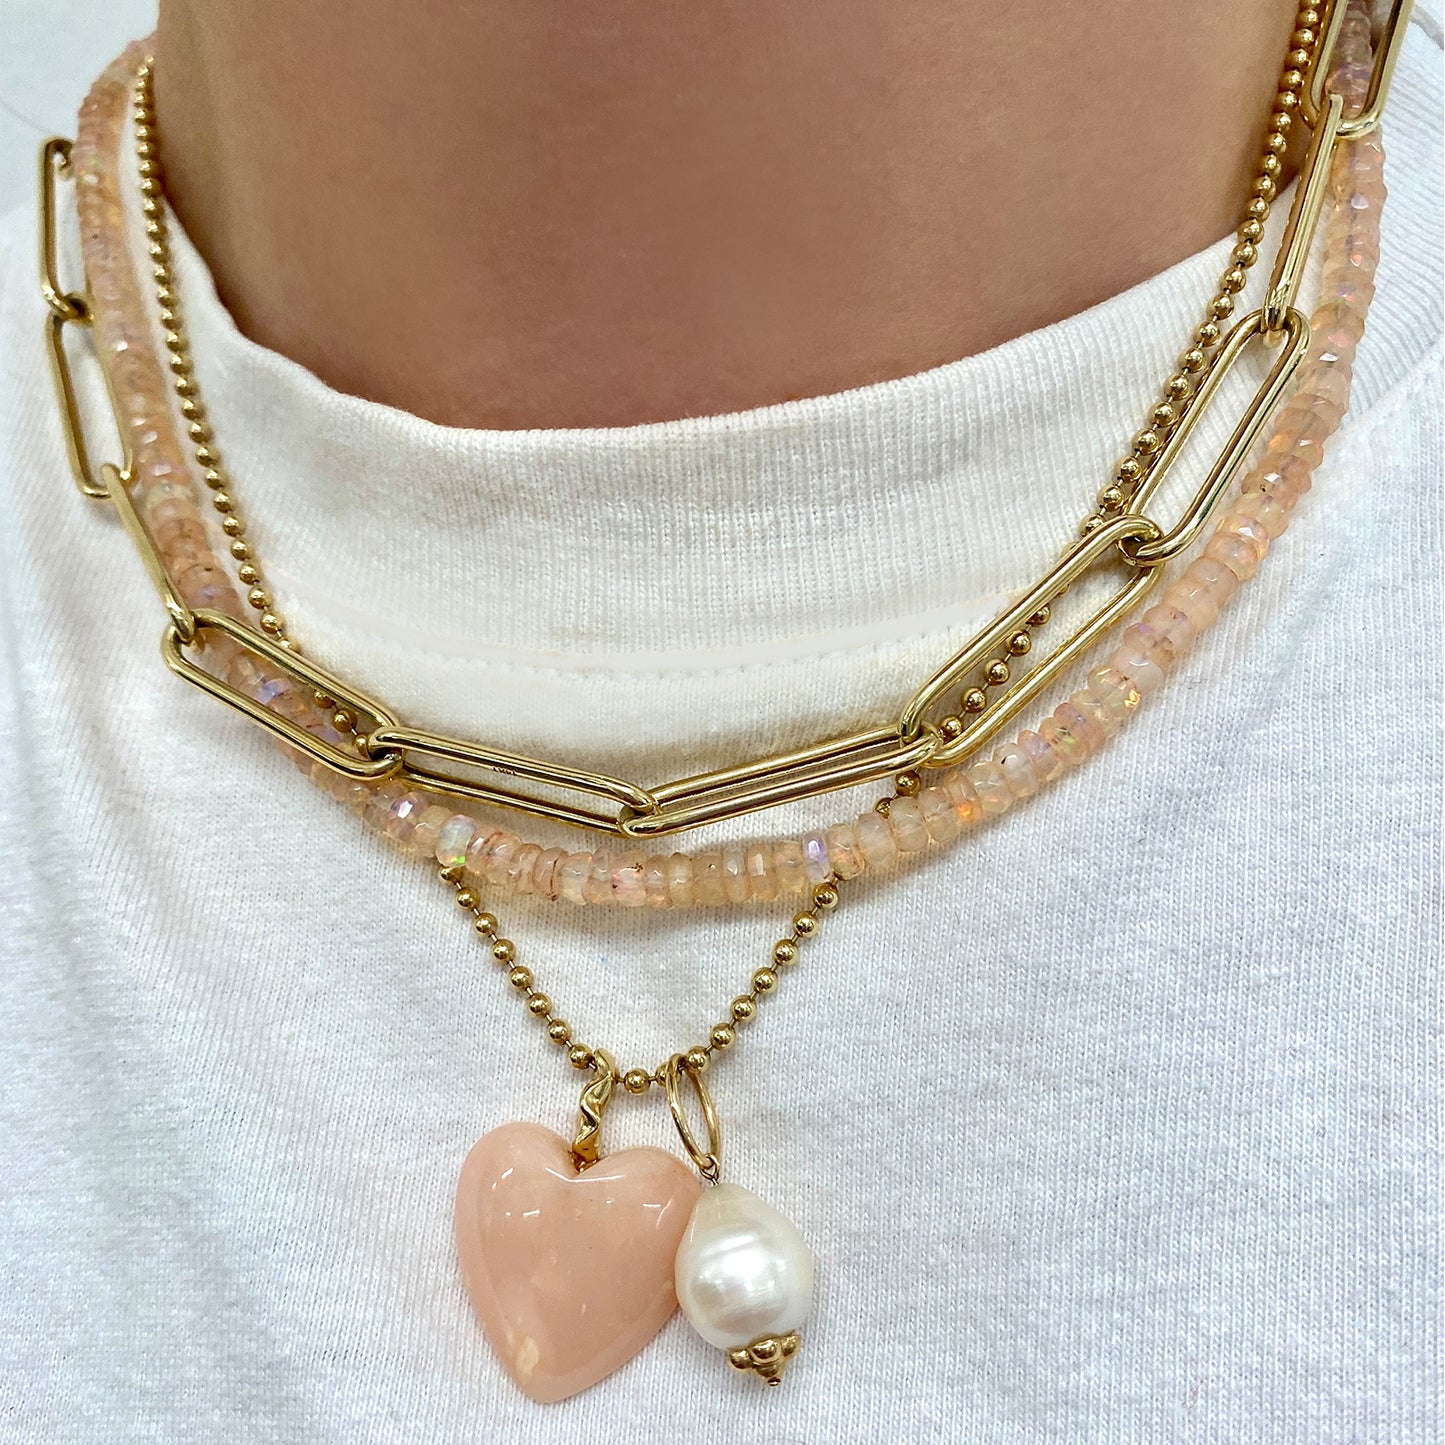 Shimmering beaded necklace made of faceted opals in shades of clear-light pink on a gold linking ovals clasp. Styled on a neck layered with the bead chain necklace, paperclip chain necklace, an mini baroque pearl charm.